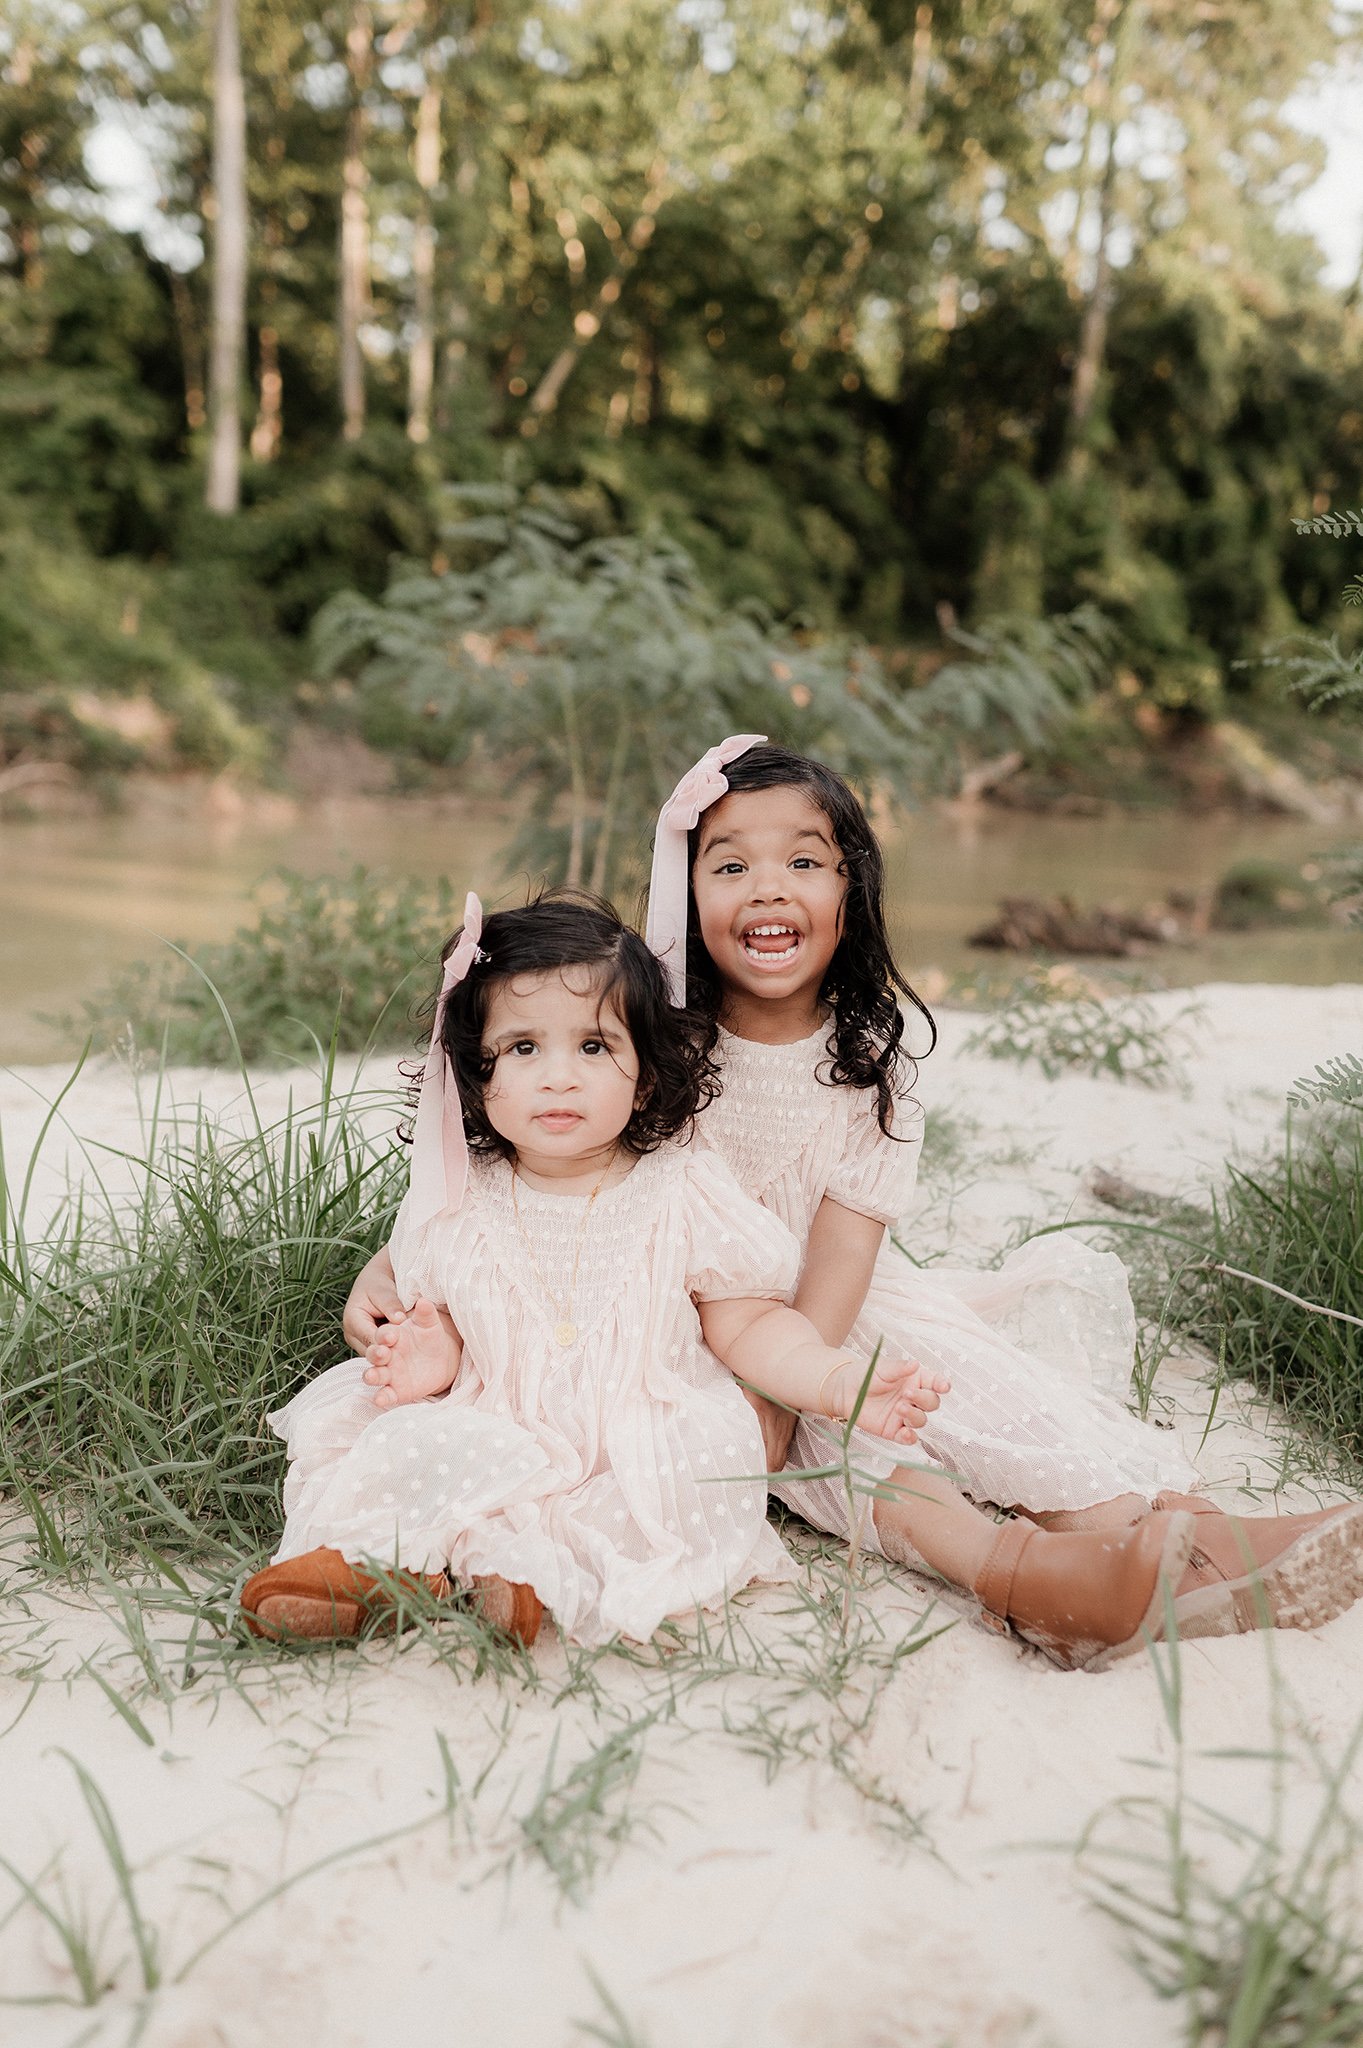 the woodlands family photographer _ conroe photographer _ houston family photographer _ ashley gillen photography _ texas family photographer _ conroe wedding photographer _ conroe texas _ cshi30.jpg